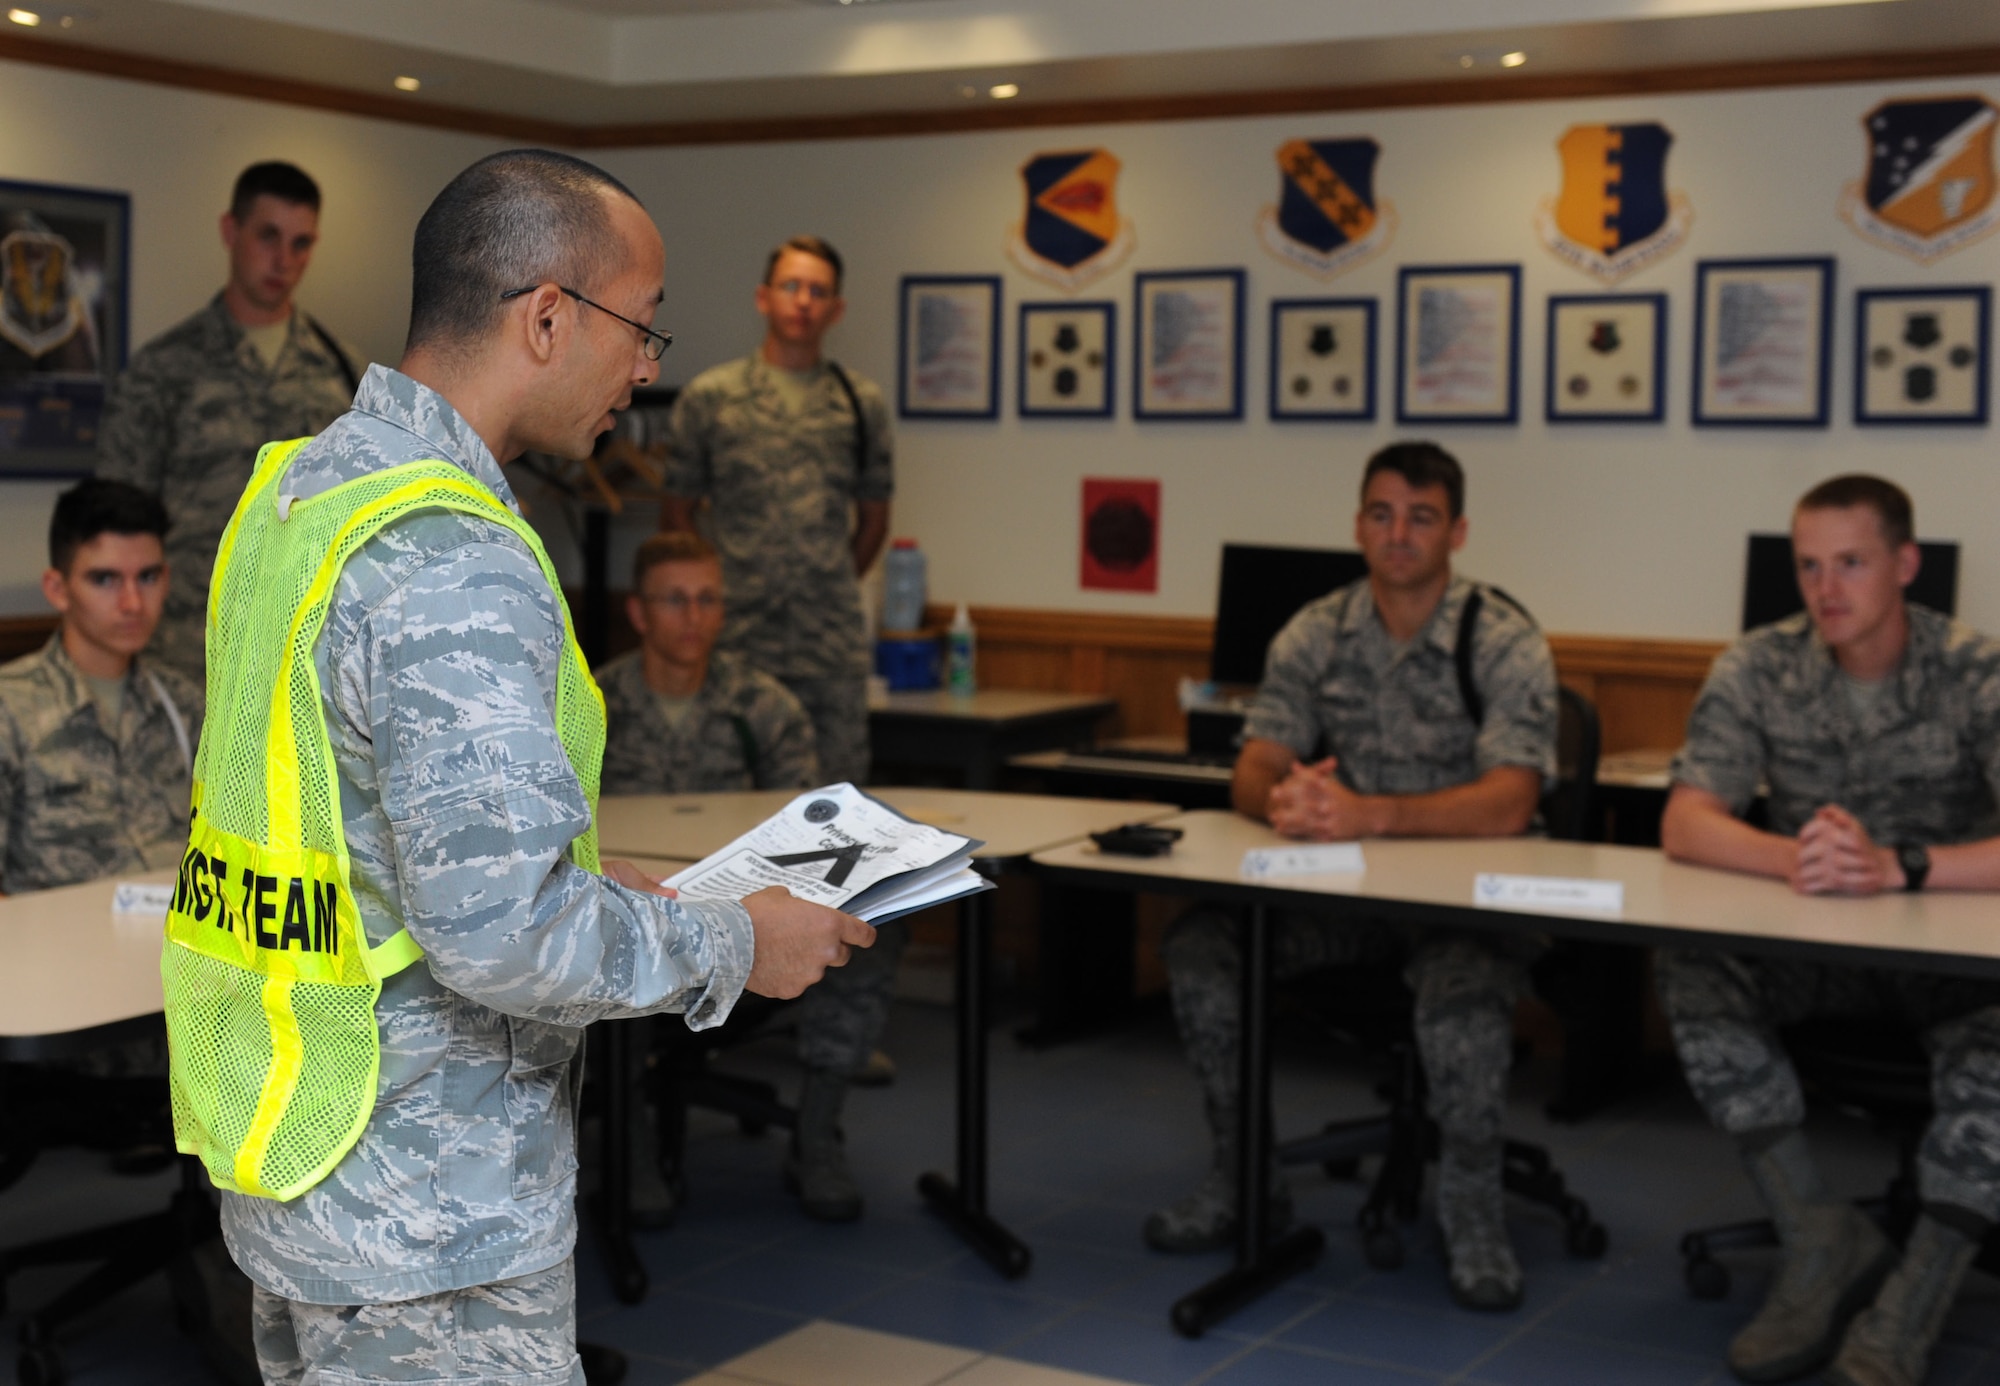 Capt. Santiago Camacho, 335th Training Squadron director of operations and shelter management team member, brief non-prior service Airmen on hurricane shelter in-processing procedures at Allee Hall during a hurricane exercise Aug. 5, 2016, on Keesler Air Force Base, Miss. The purpose of the exercise was to prepare Keesler for the current hurricane season. (U.S. Air Force photo by Kemberly Groue/Released)